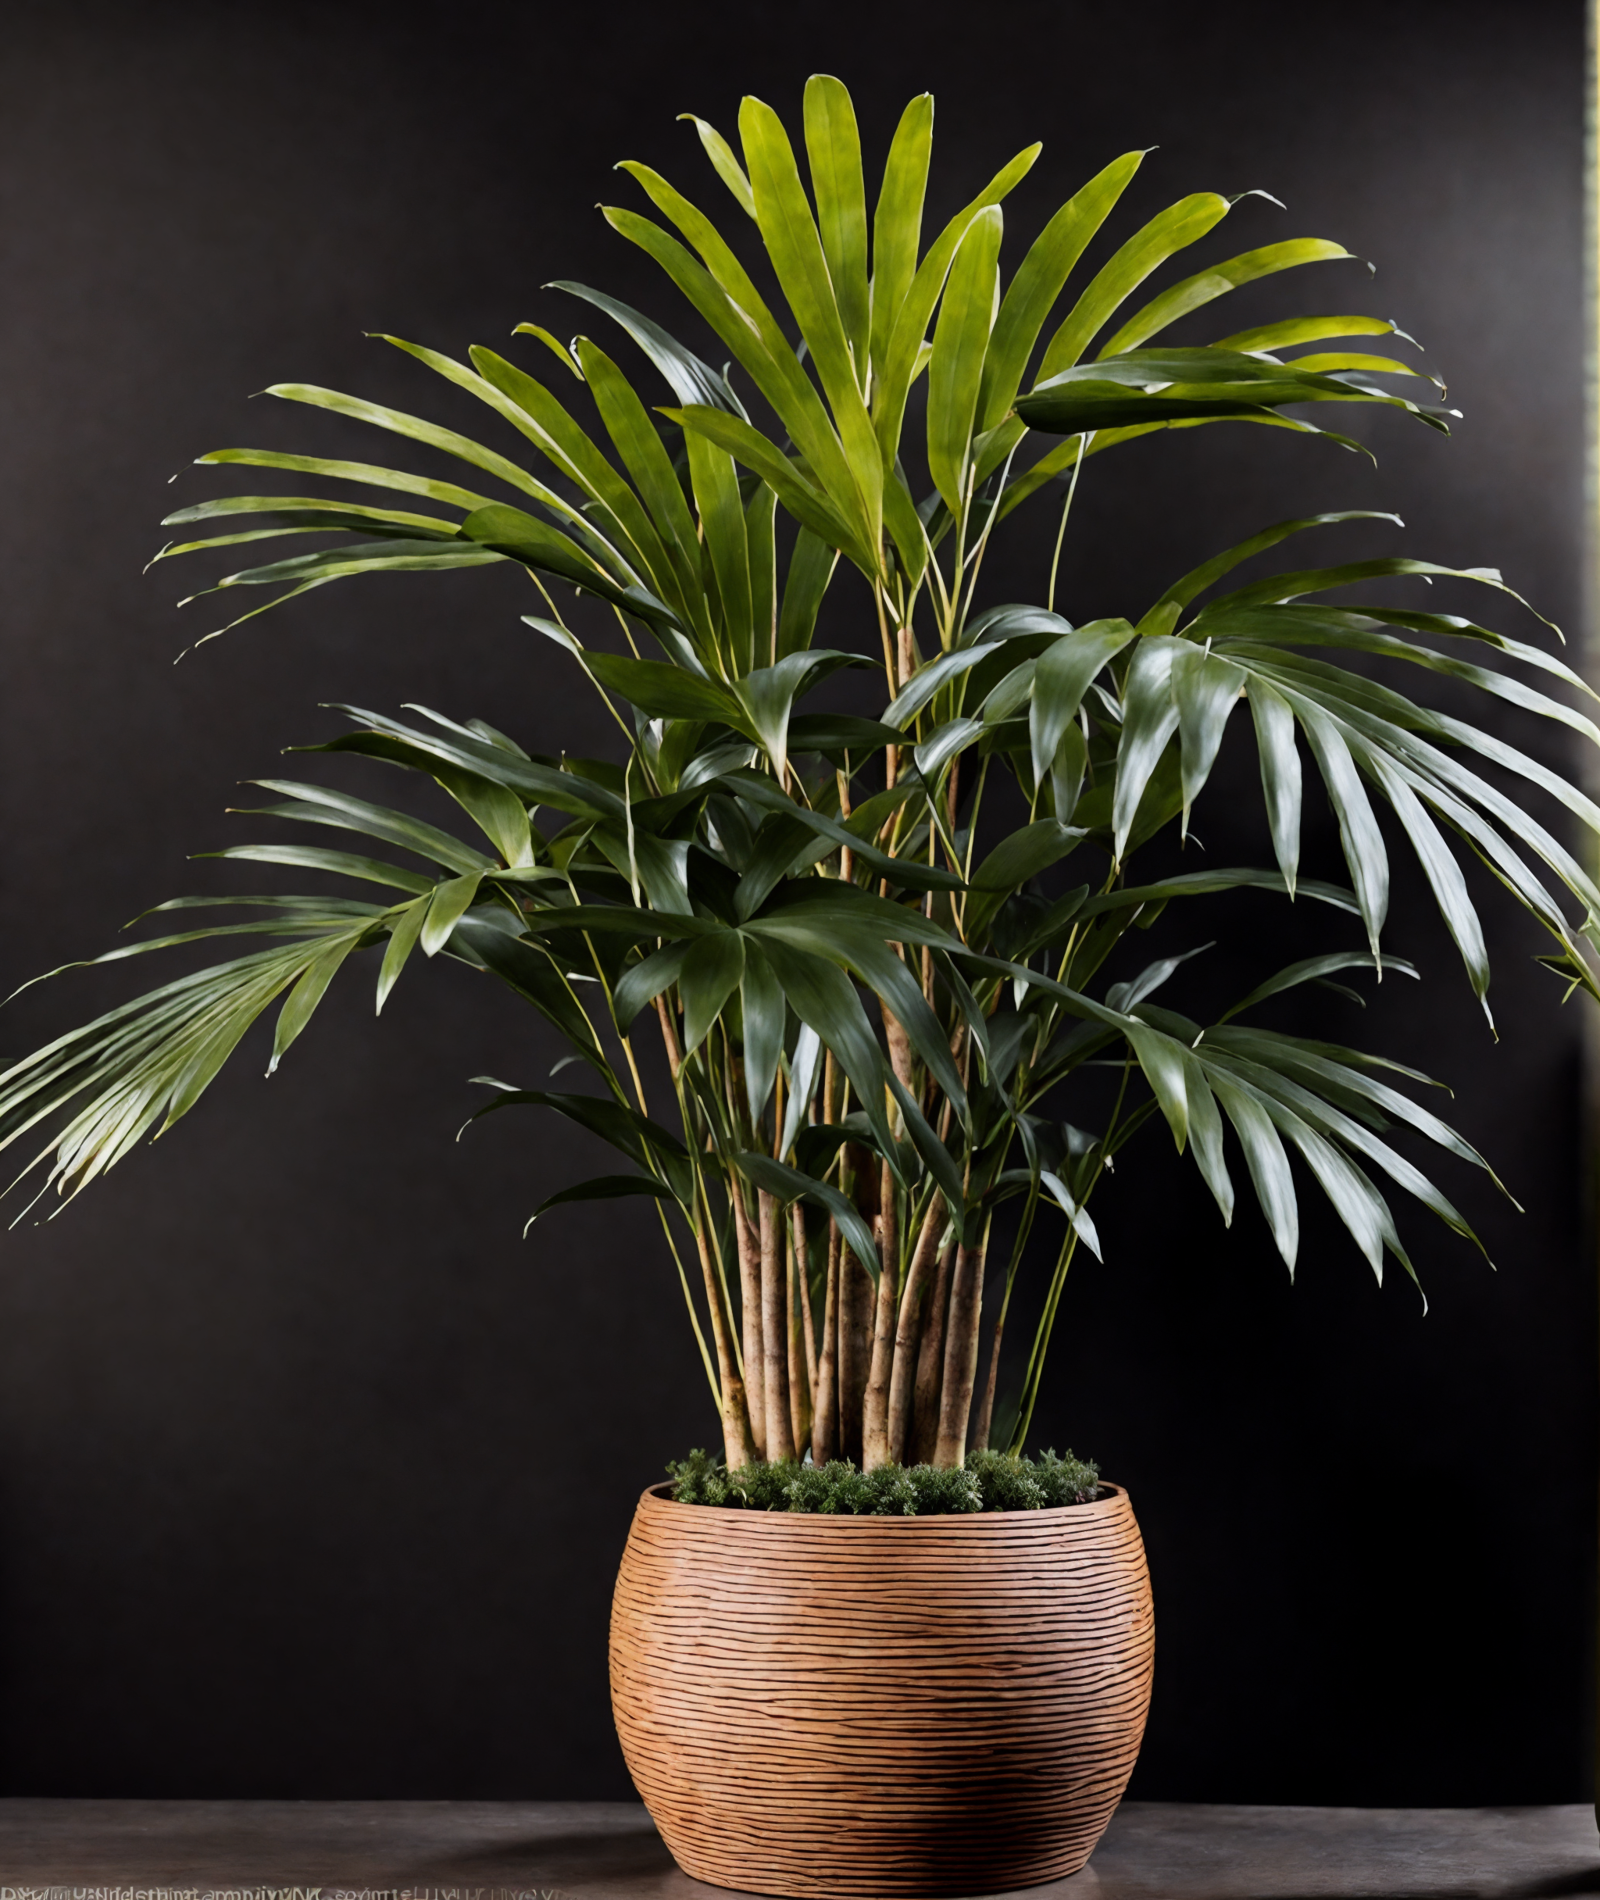 Howea forsteriana in a brown vase on a table, with clear lighting and a dark background.